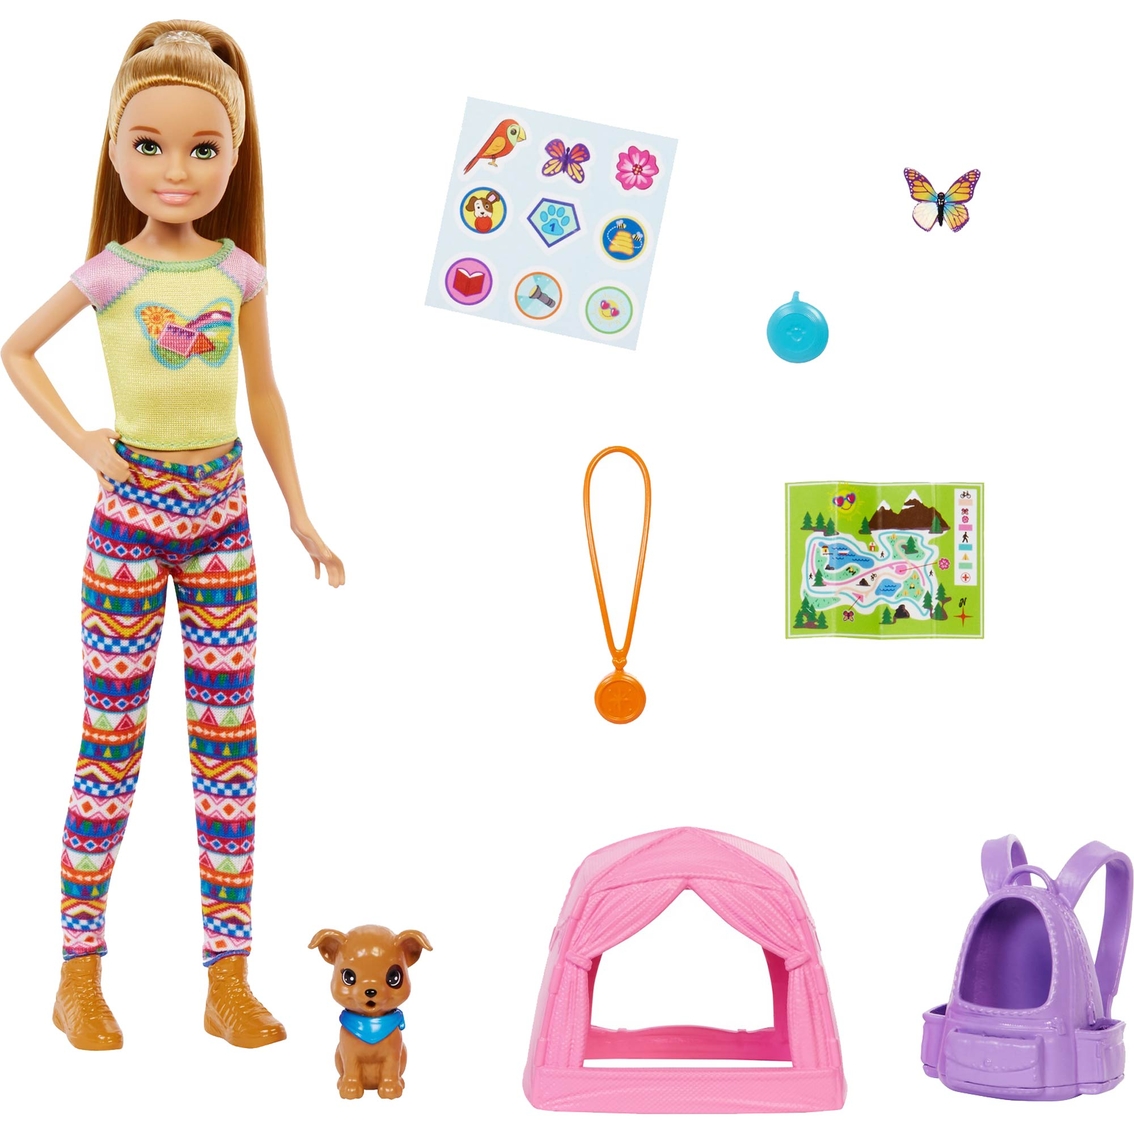 Barbie Camping Stacie Doll and Pet Playset - Image 2 of 2